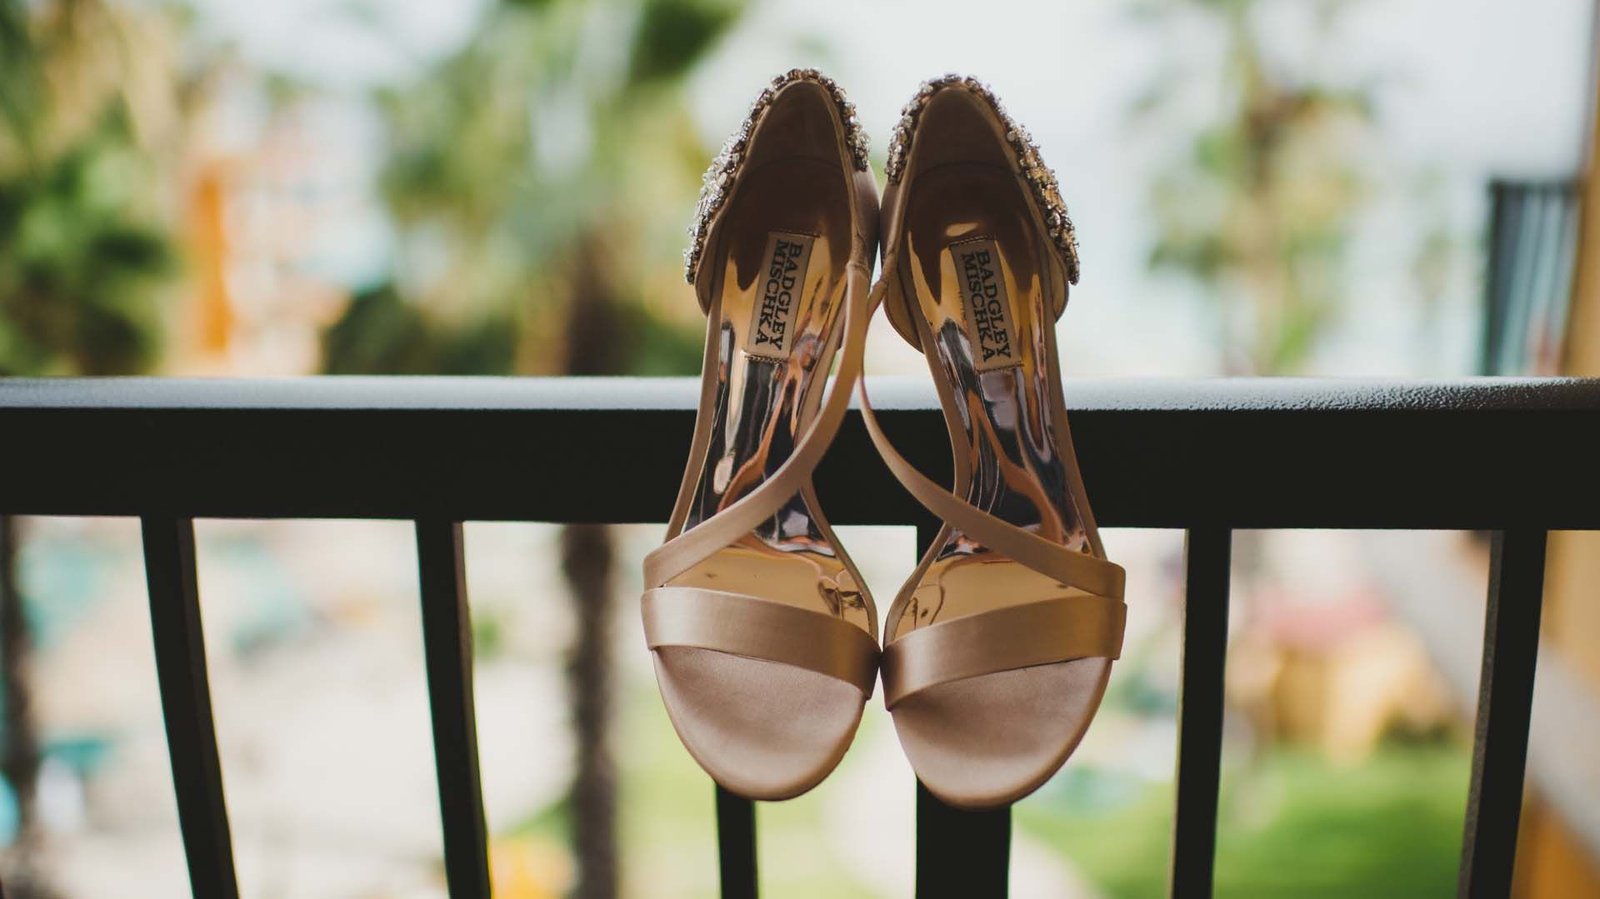 Beautiful shoes were worn by the Bride on her Wedding day. They had such beautiful coloring and went perfect with the color of her wedding dress and makeup. Her wedding took place at Villa del Palmar, in Los Cabos, Mexico.